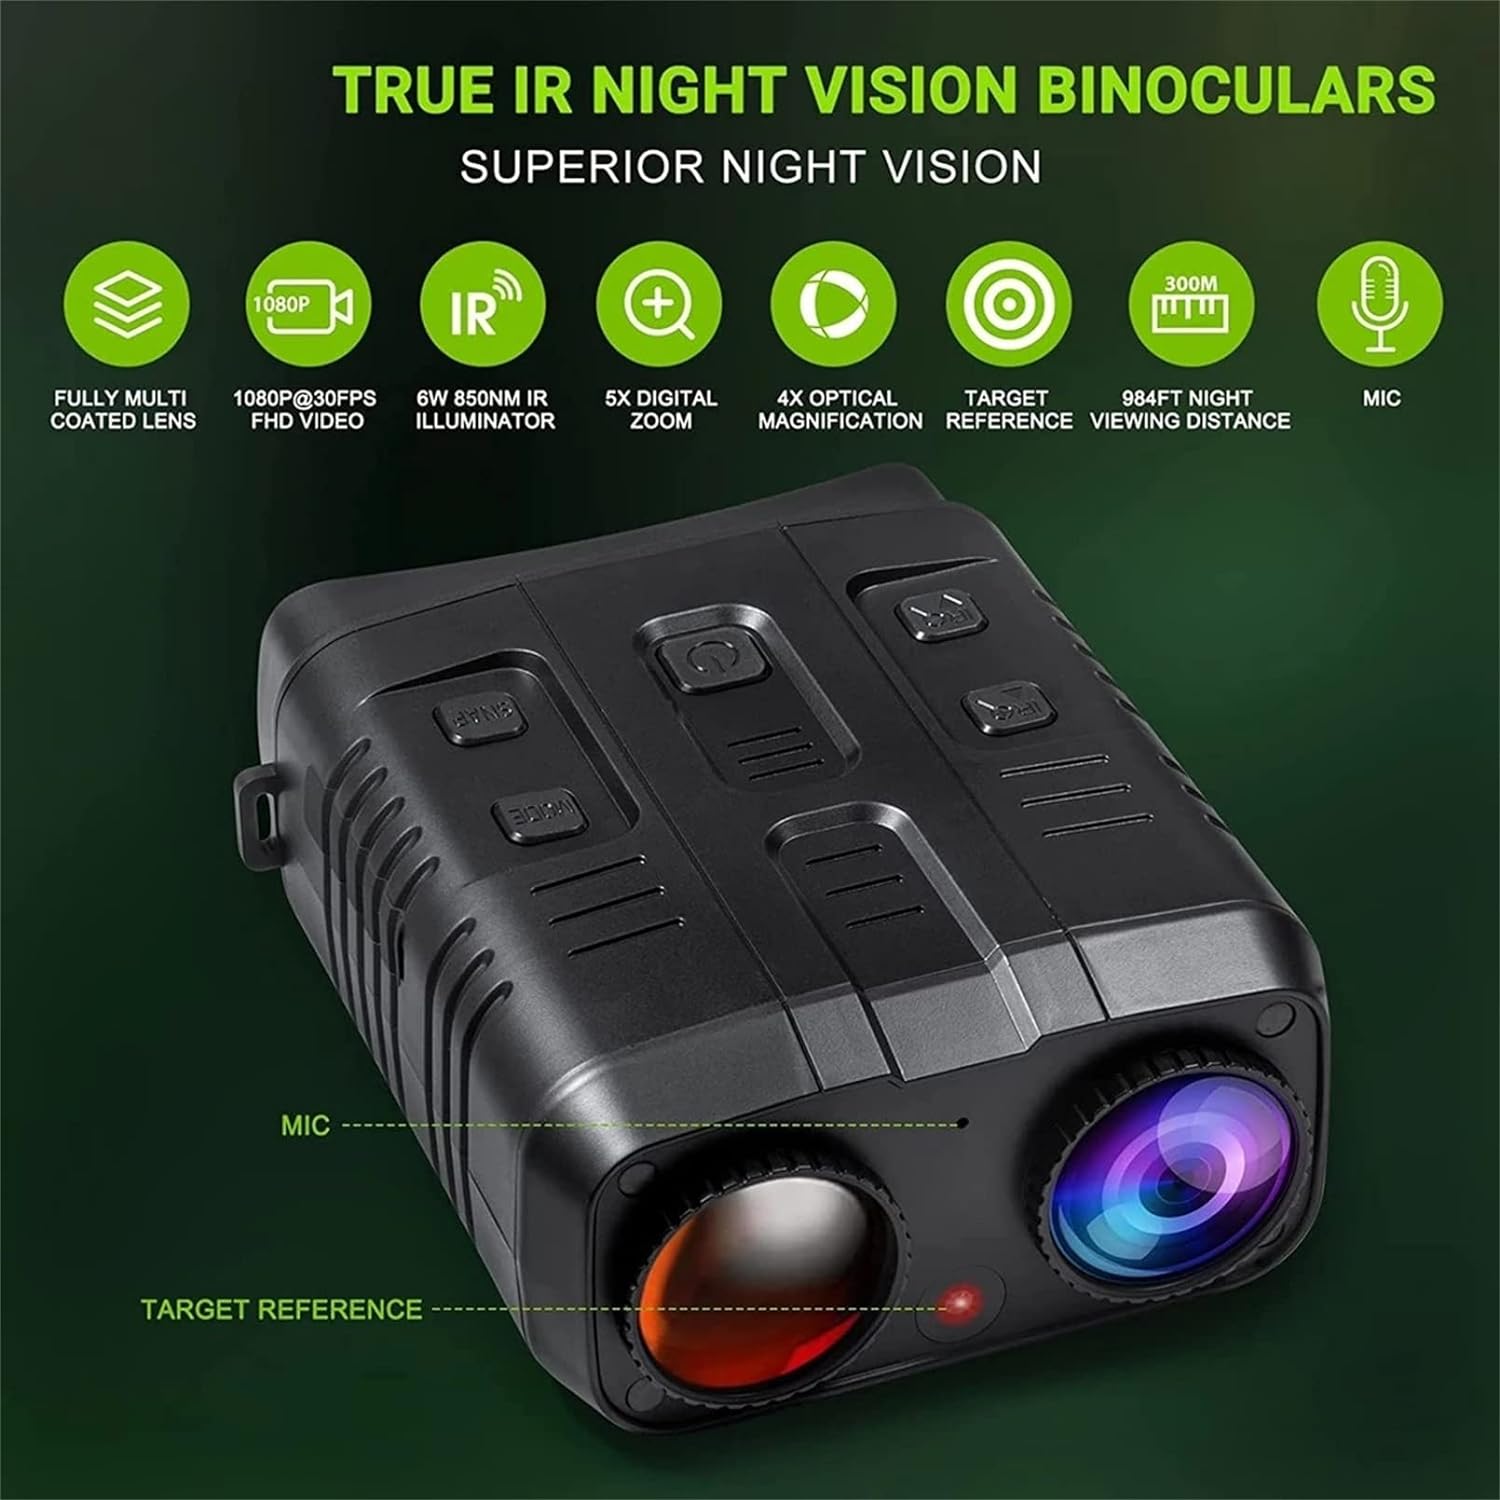 Discover the unseen with the best night vision binoculars, featuring 1080P FHD video, 850nm IR illuminator, and a viewing distance of up to 984ft, perfect for detailed nocturnal wildlife observations and security surveillance.